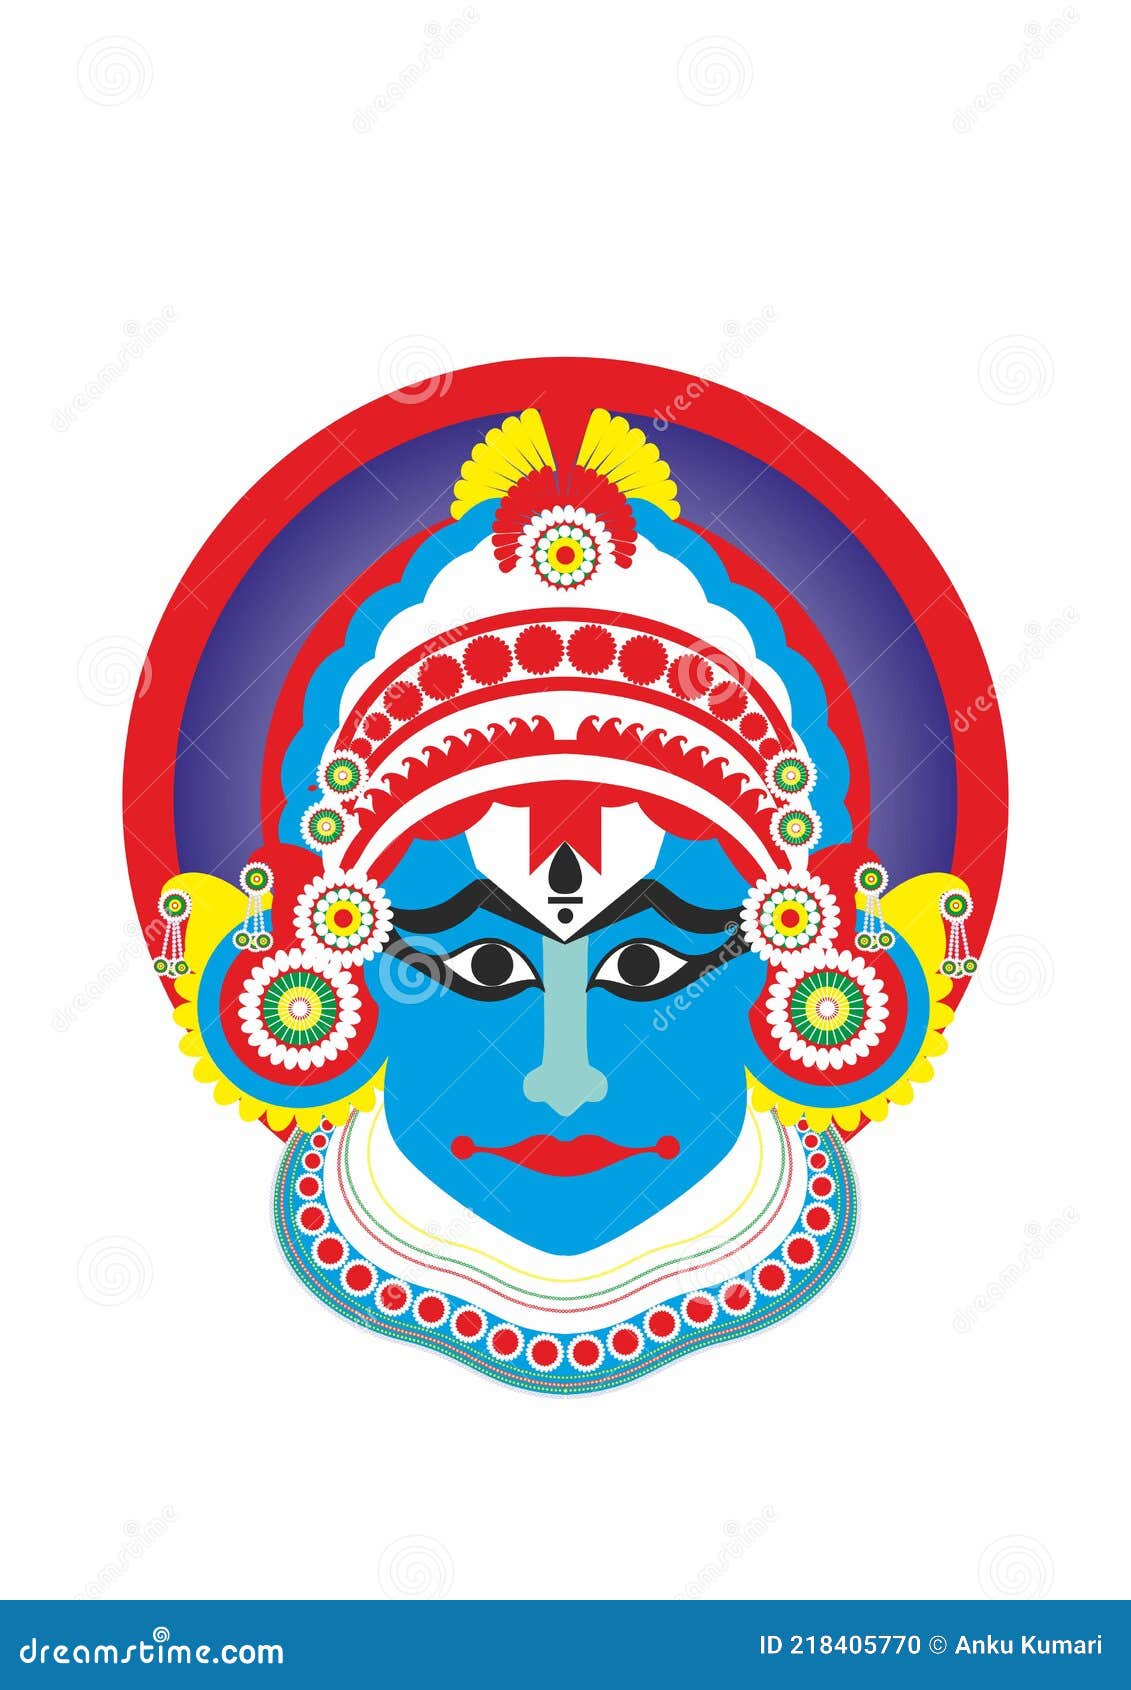 CJ Pre Marked MDF Base Kathakali Face Art Cutout for Crafts Work Home, Room  Decor Laser Cut Artistic DIY Work Art and Craft (12 x 12 Inch Approx)_EB 7  : Amazon.in: Home